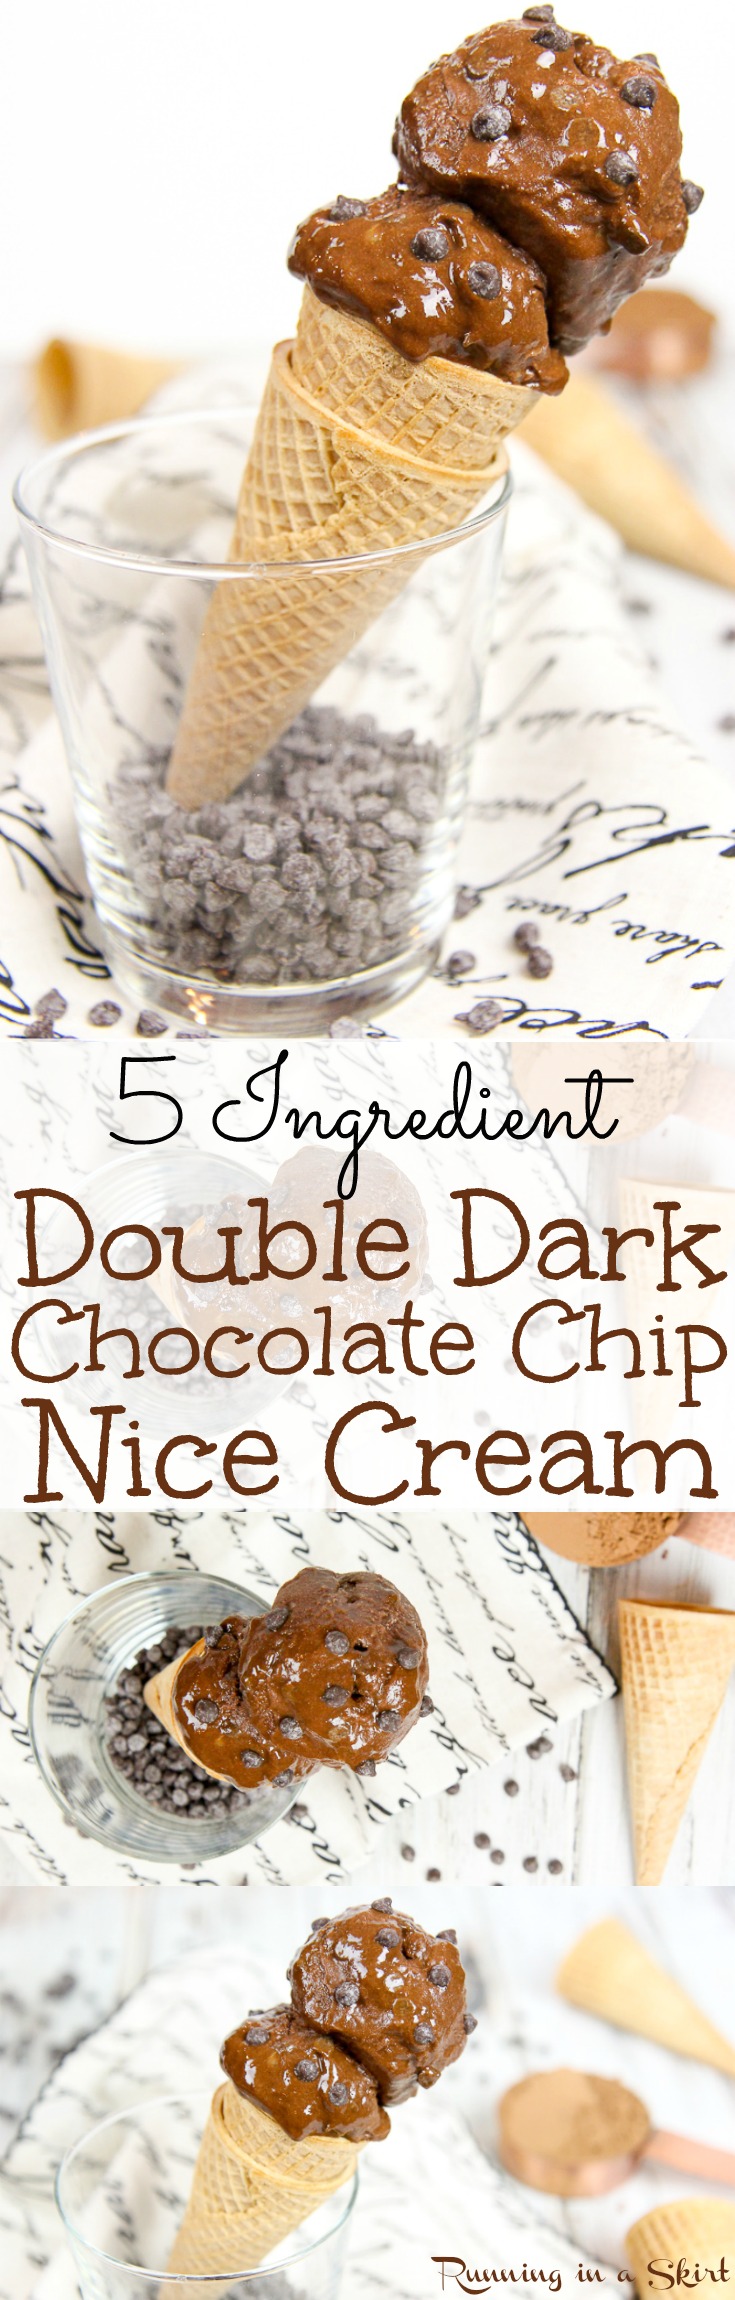 Creamy Double Dark Chocolate Nice Cream recipe! A healthy, clean eating ice cream alternative with frozen bananas. No ice cream maker needed! Recipes for a fun sweet treats that is guilt-free. Vegan, Dairy free, Added Sugar Free, Low Carb, Gluten Free, Vegetarian! / Running in a Skirt via @juliewunder